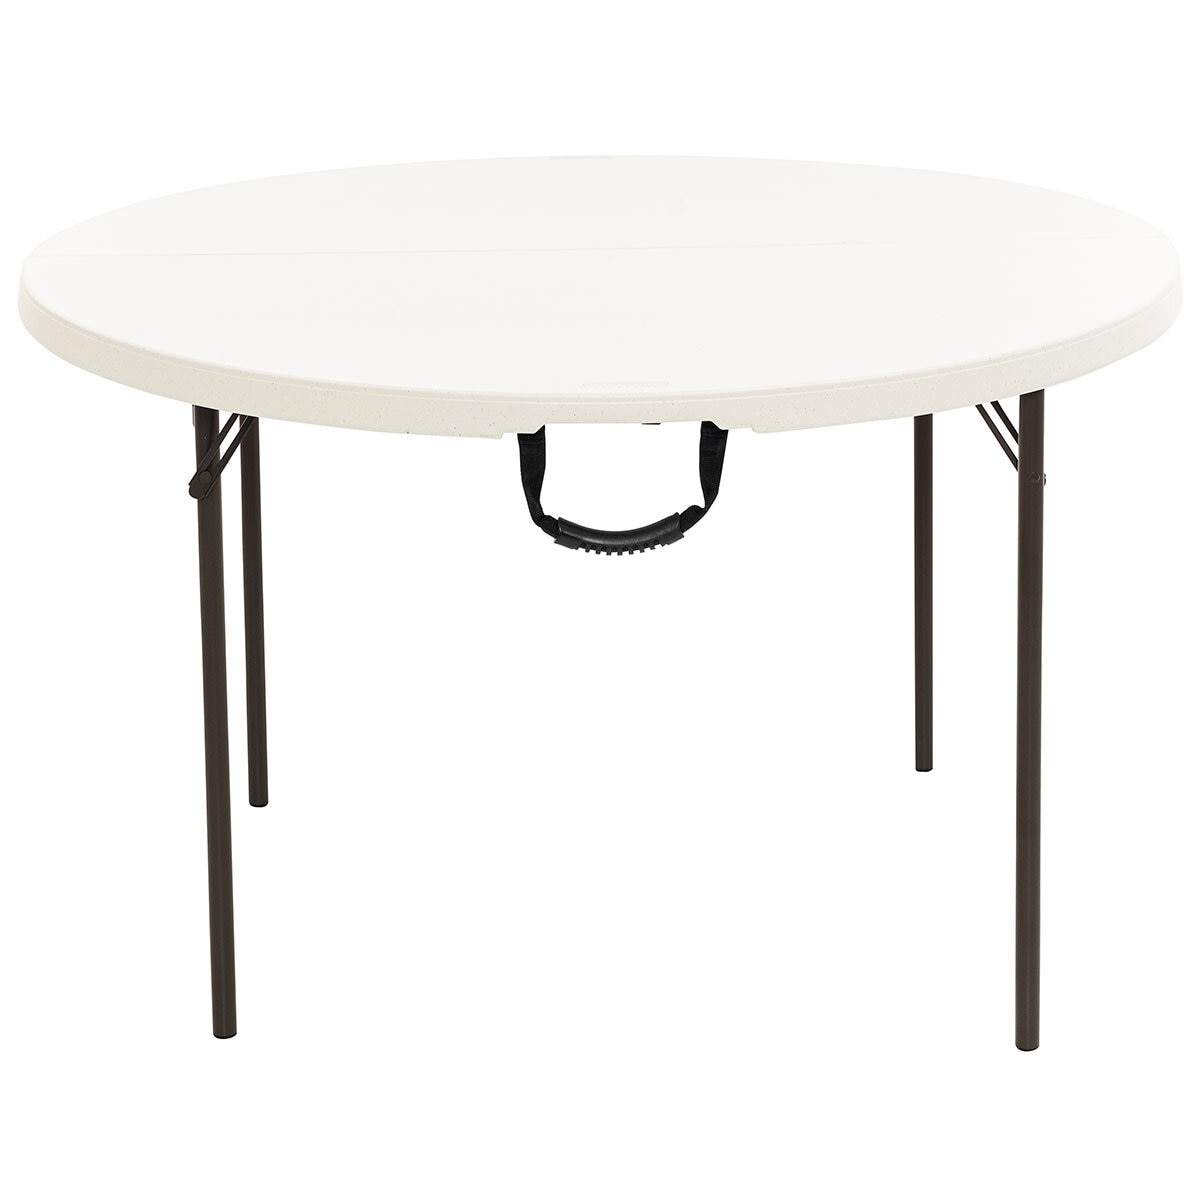 Lifetime Fold in Half Round Table Almond 122cm